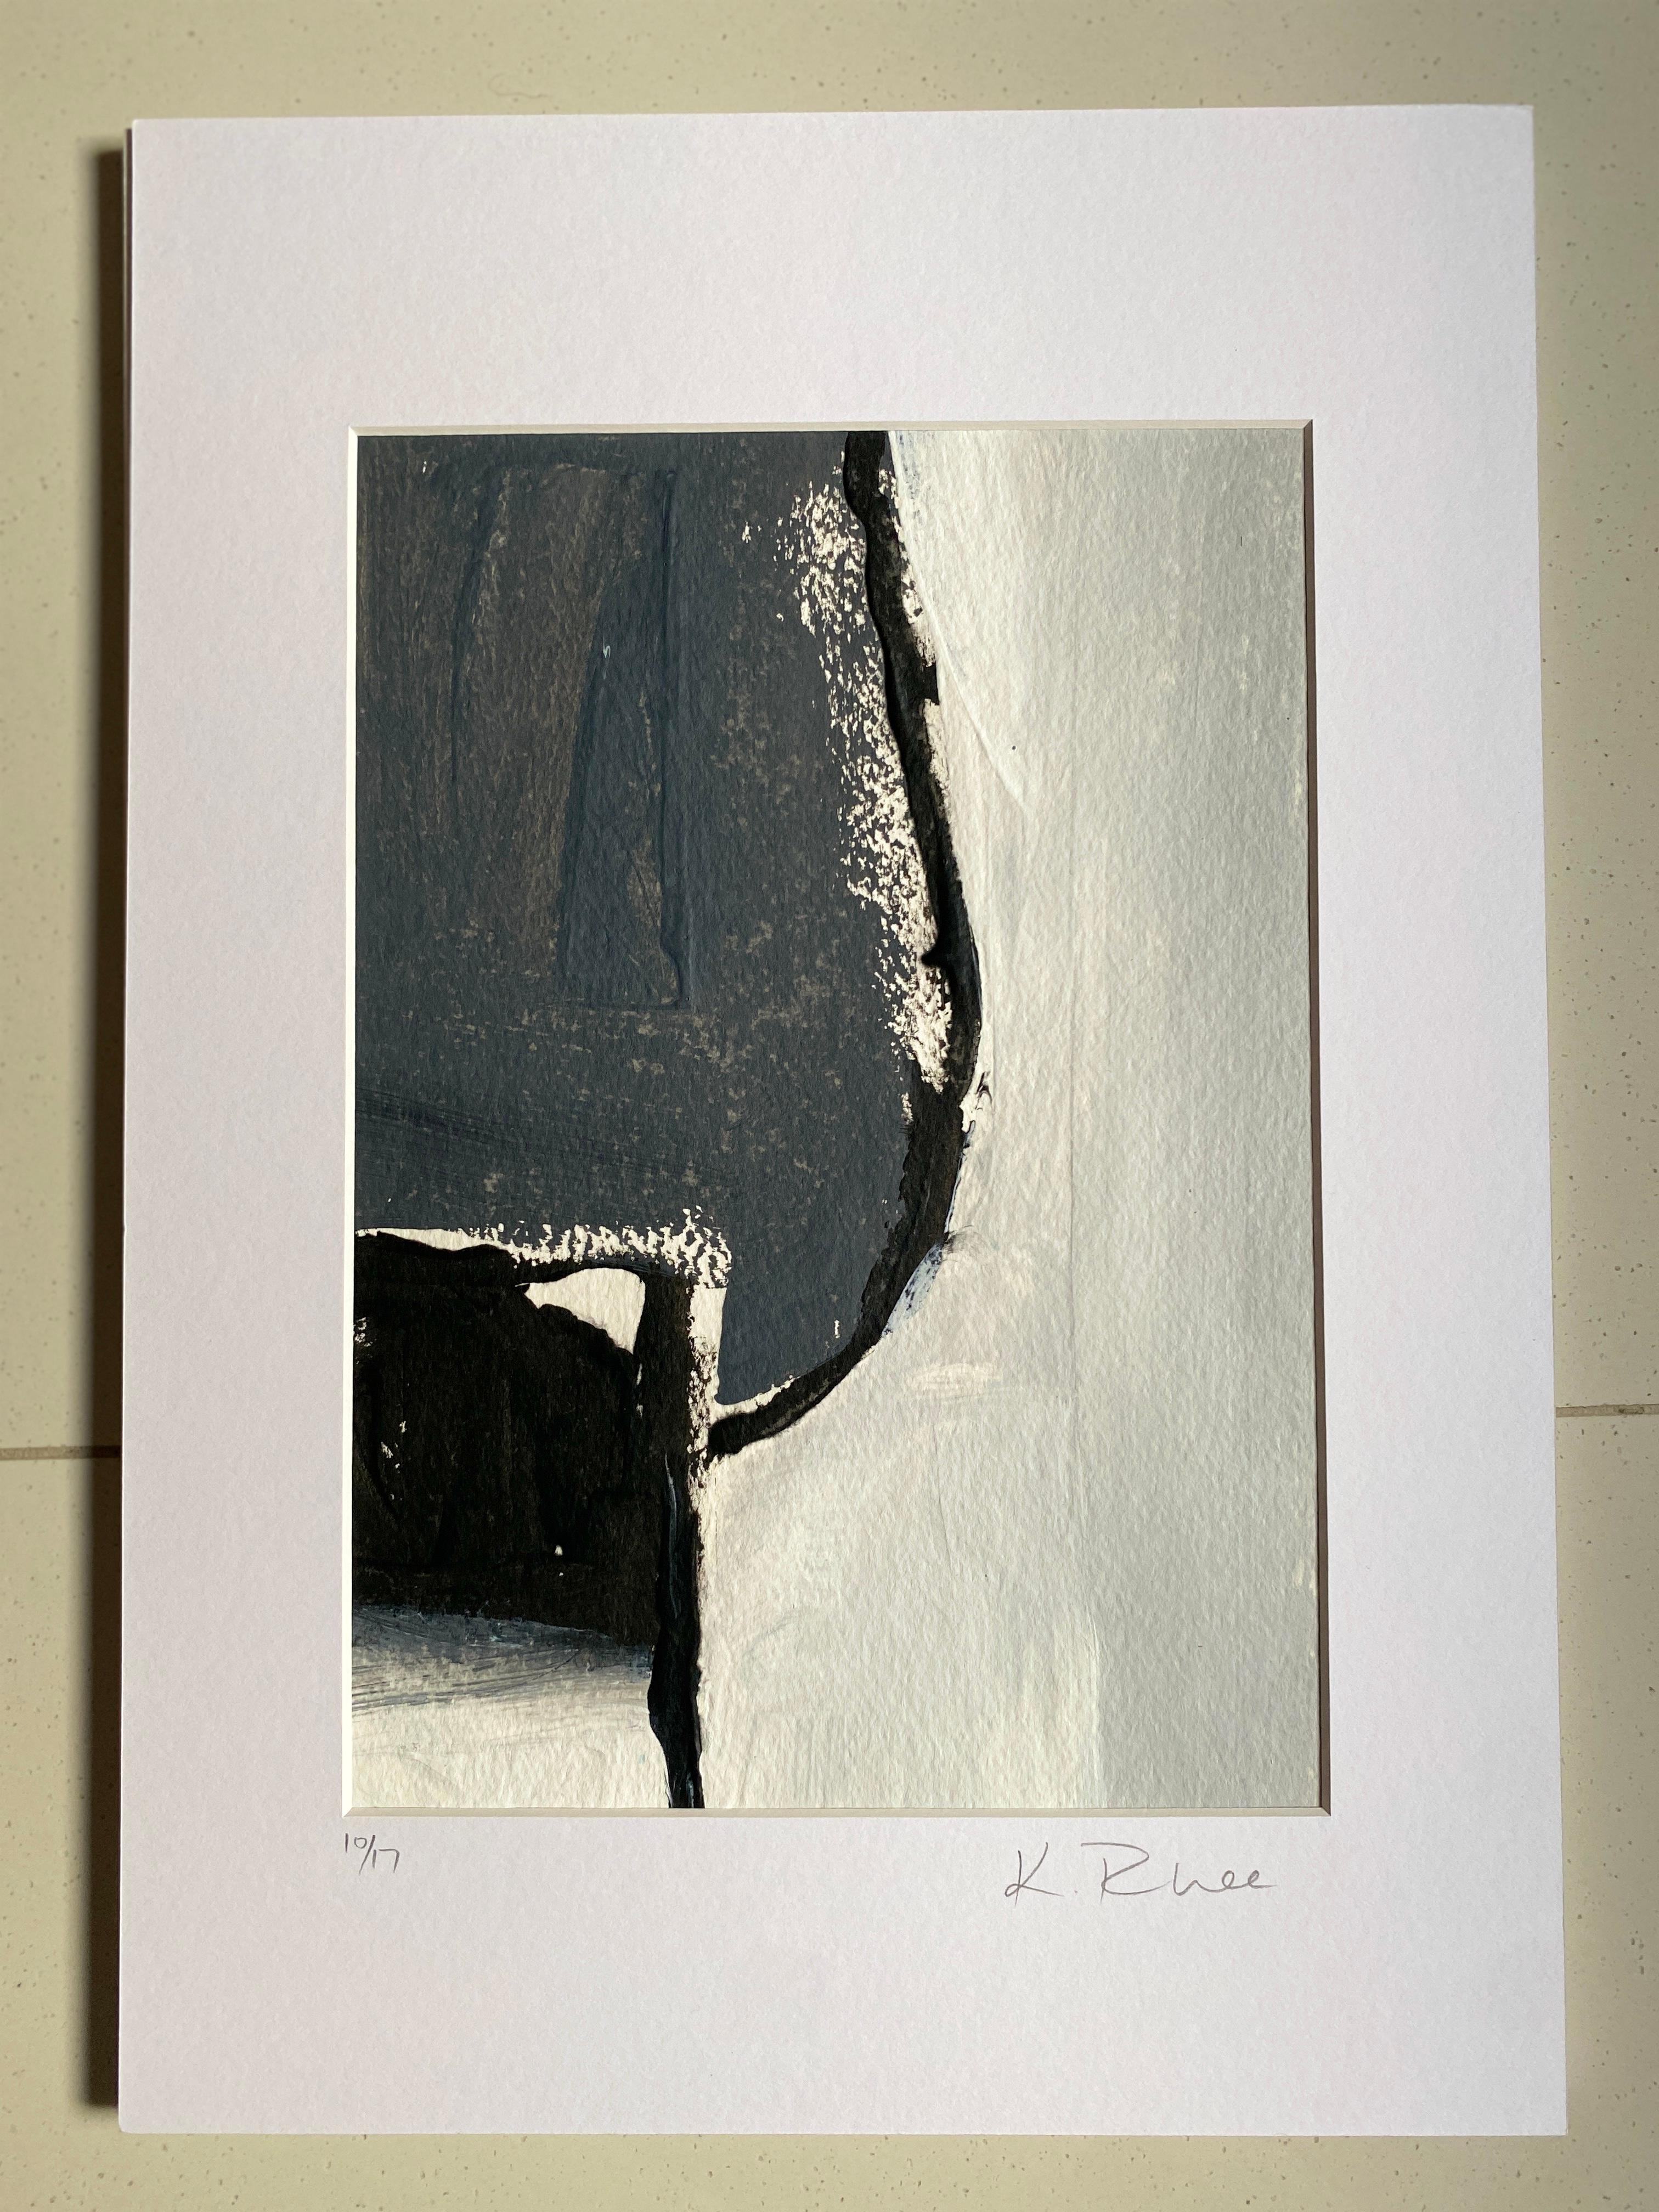 This is a small series of works on paper titled 'Abstract Forms' exploring natural forms, mid century modern, textures and surfaces of mother nature. Created to invoke positive, calm energy in colours of black, grey and white.  This small work is